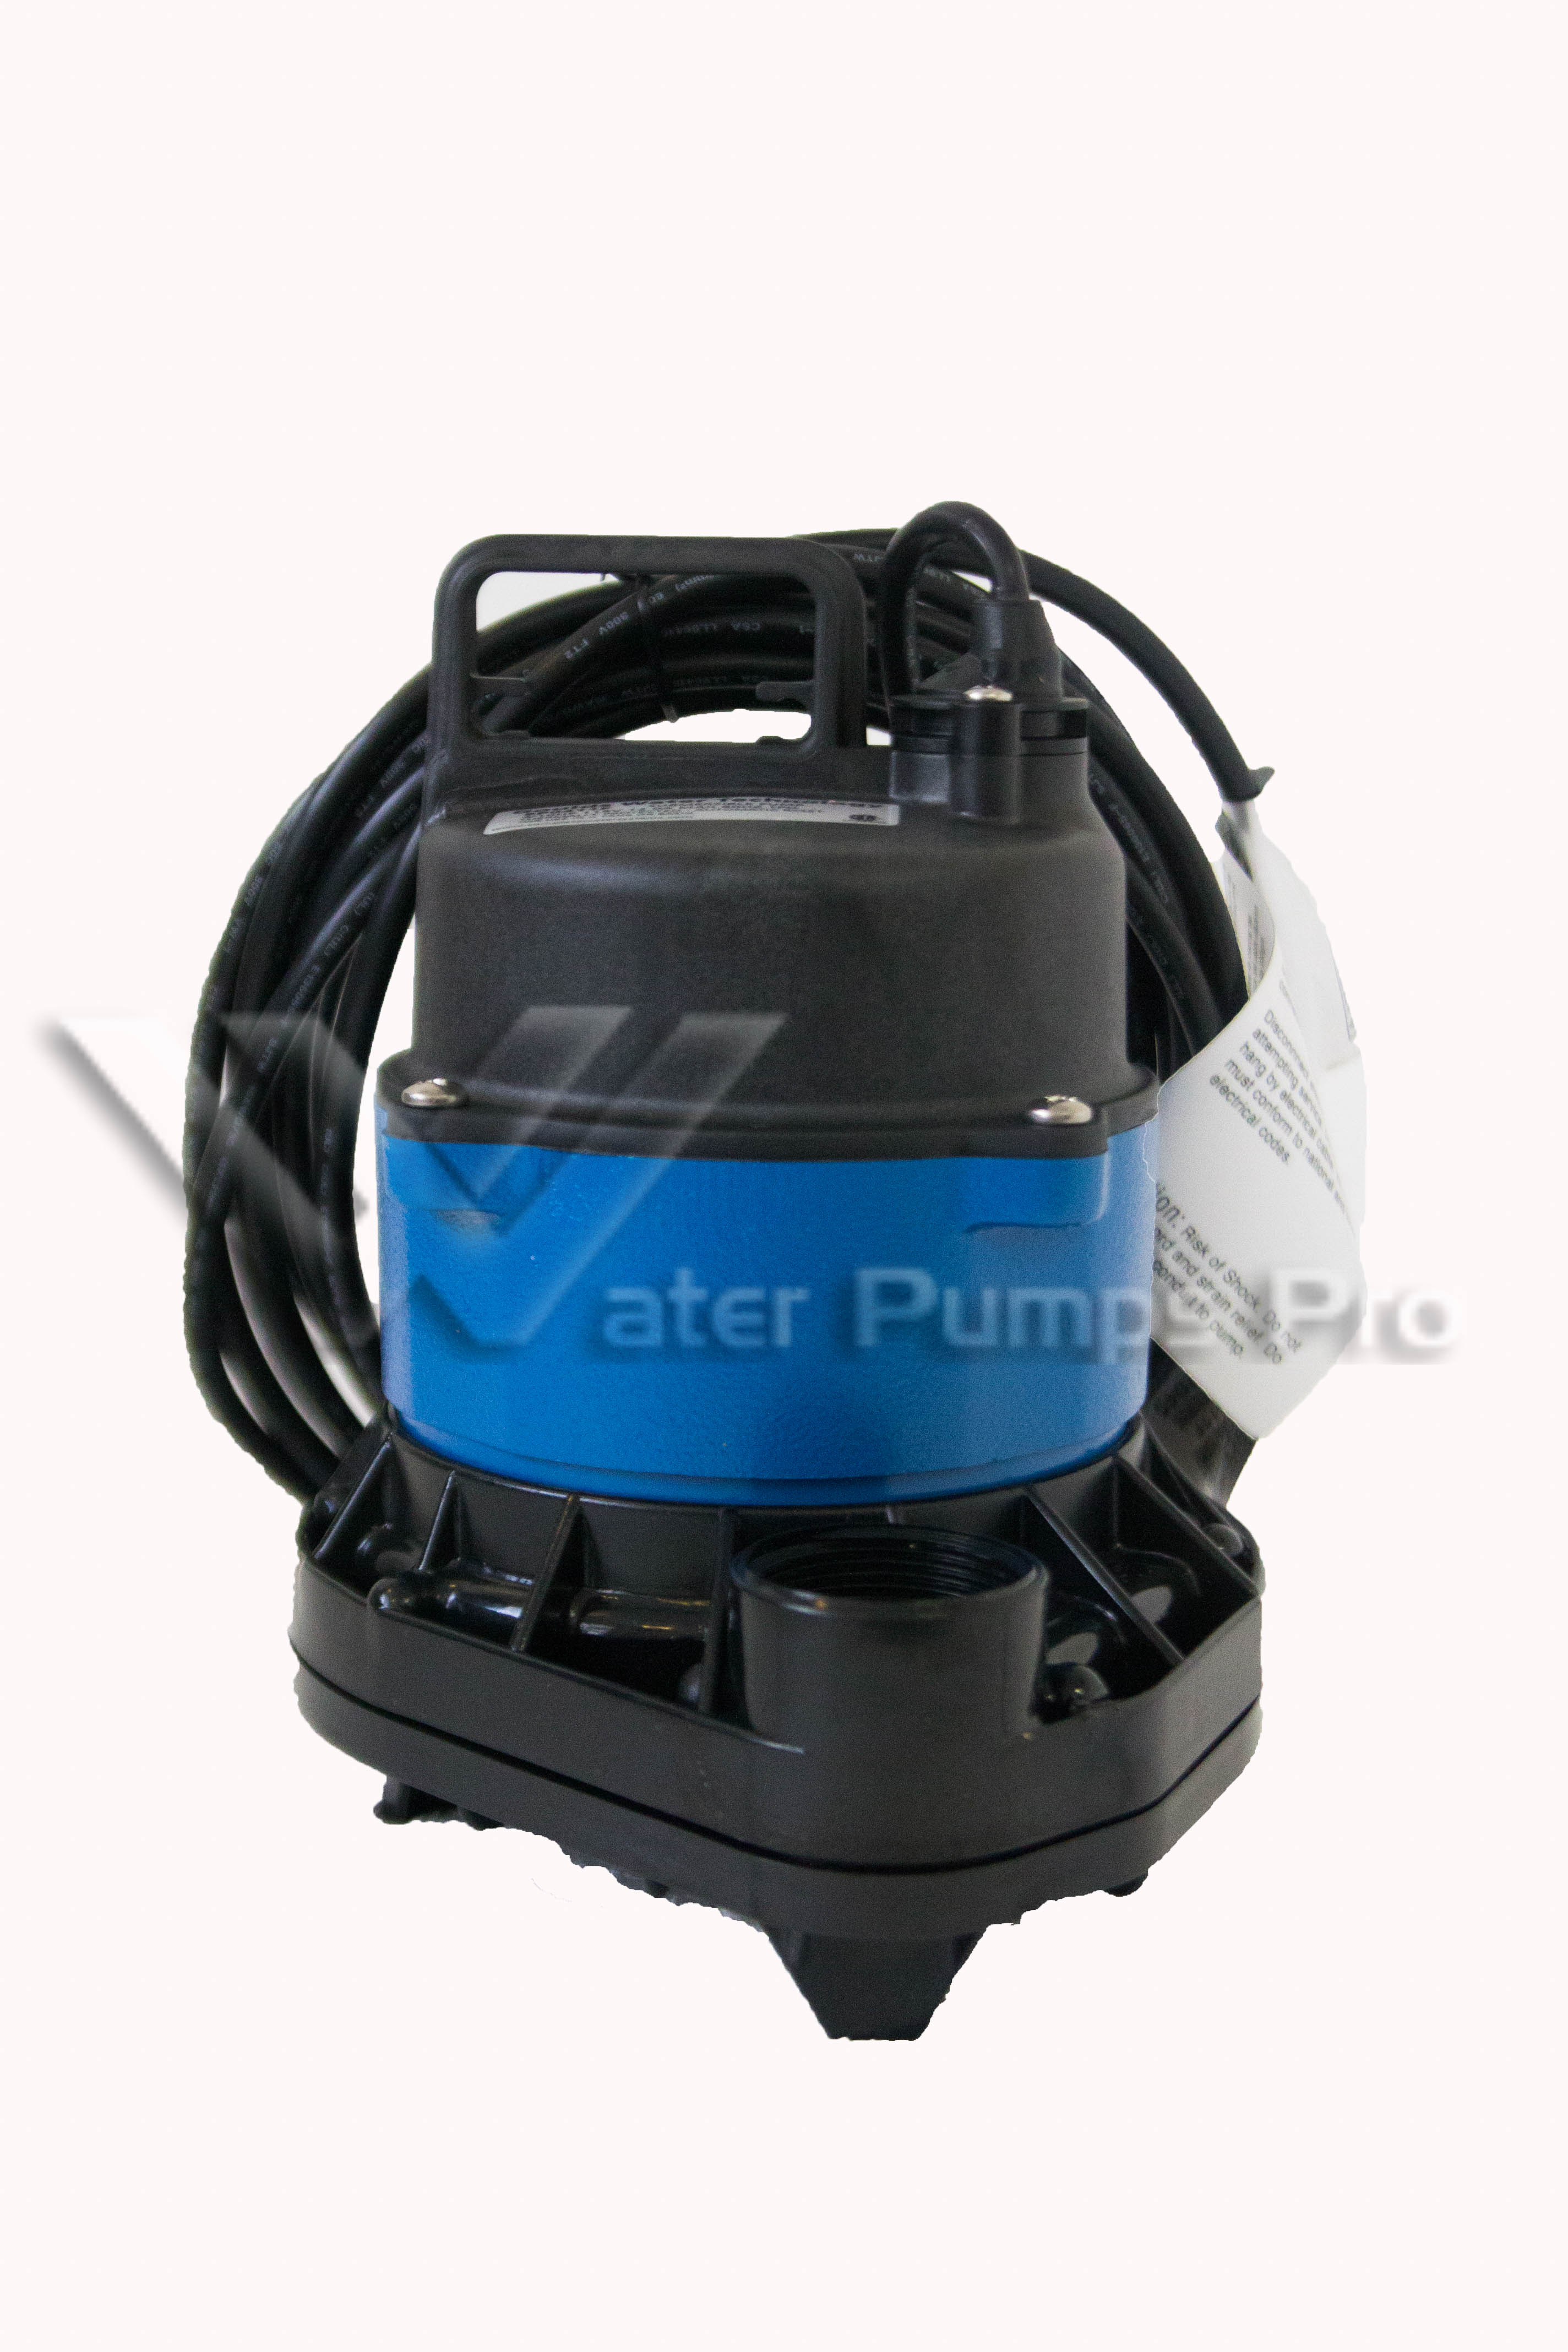 Goulds EP0411F 4/10HP 115V Submersible Effluent Pump - Click Image to Close